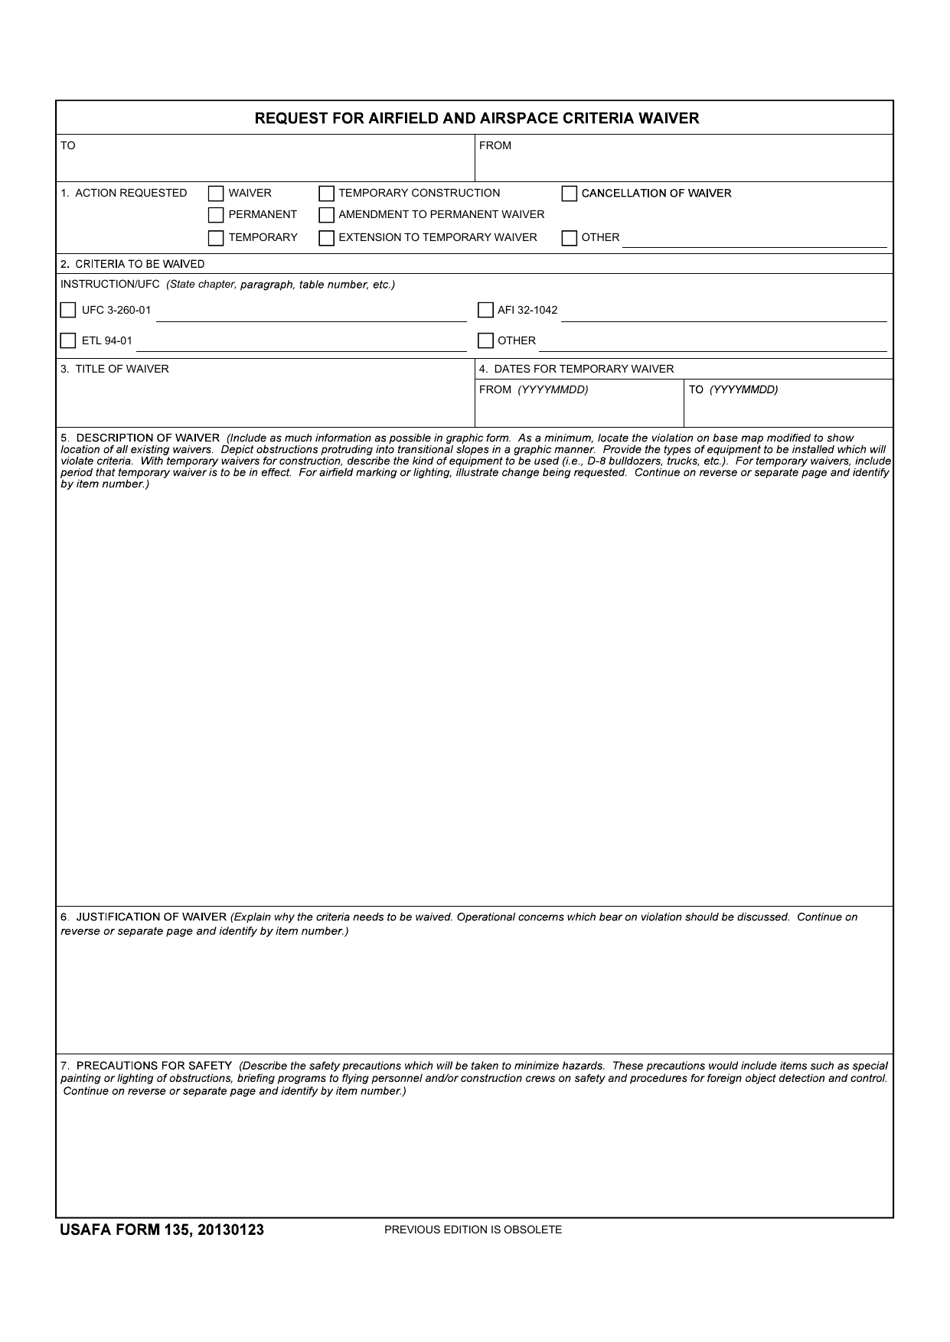 USAFA Form 135 Request for Airfield and Airspace Criteria Waiver, Page 1